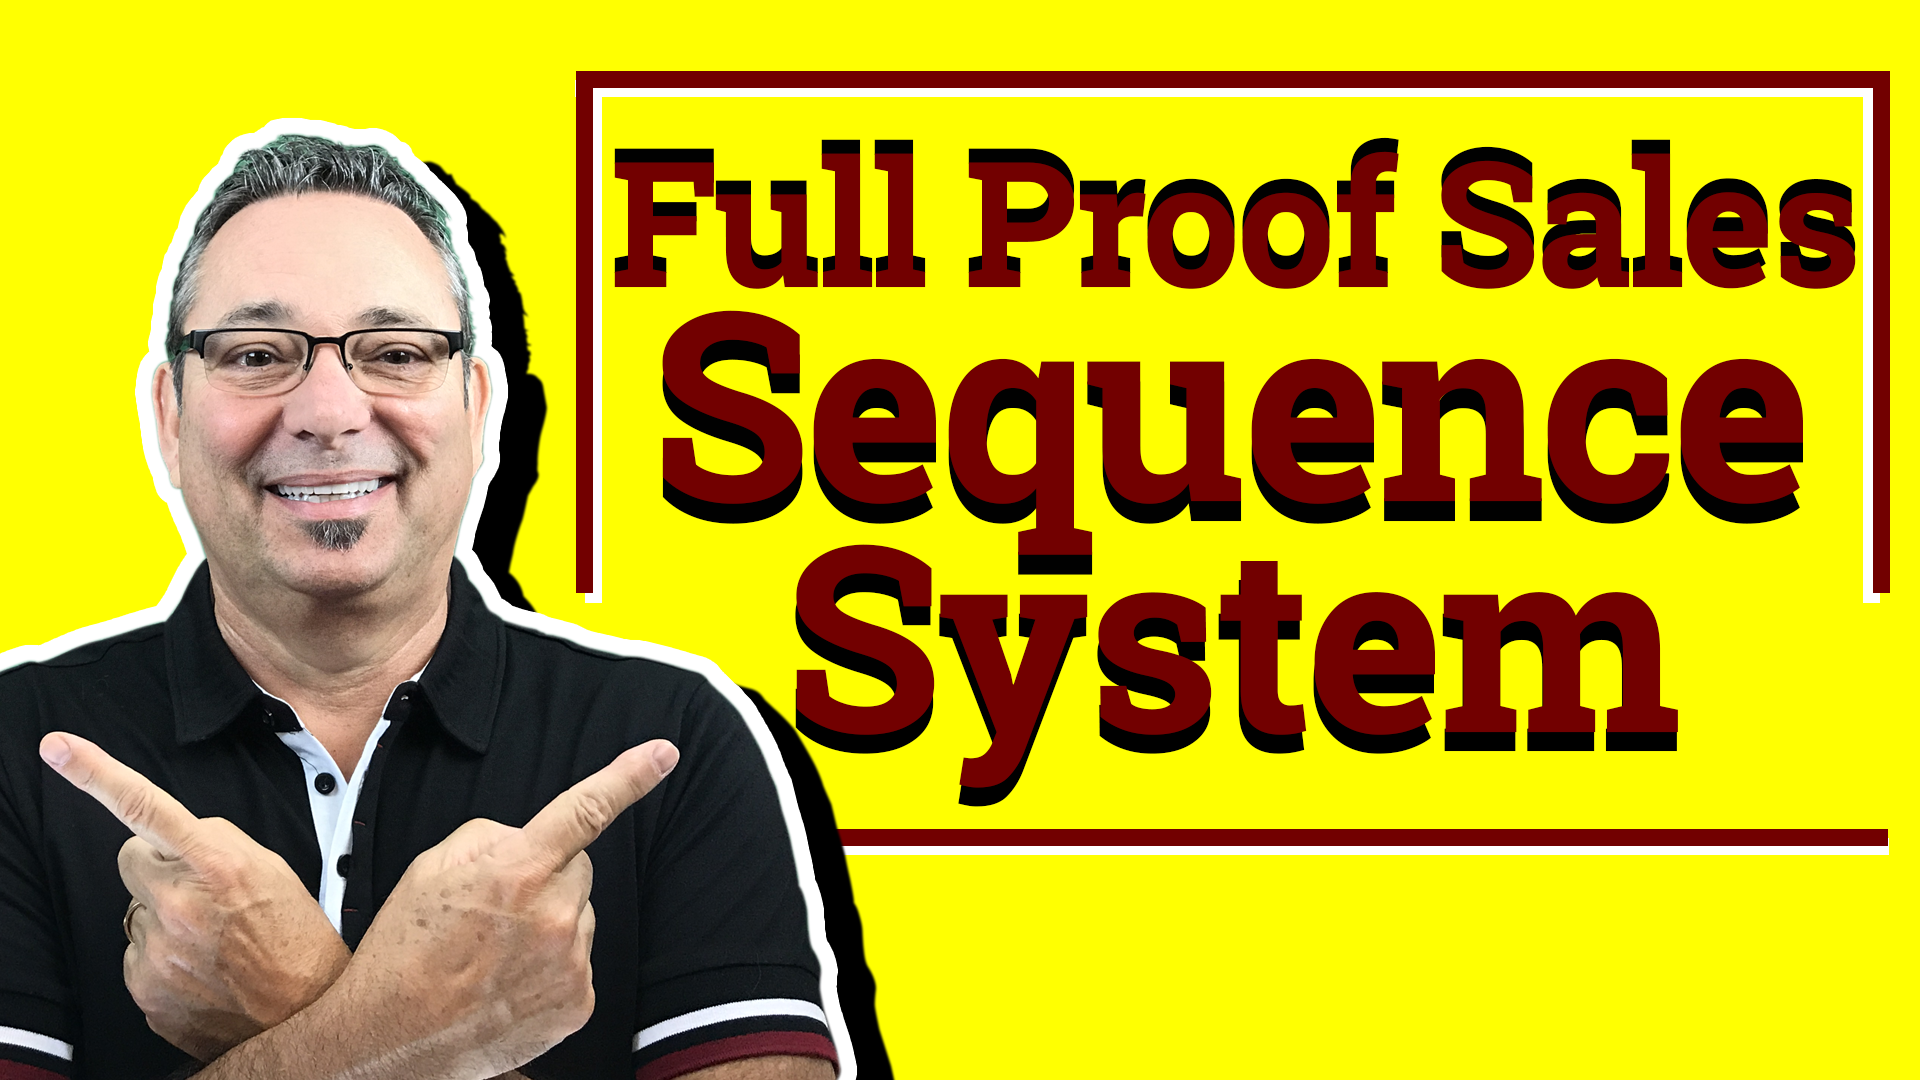 Full proof sales sequence system